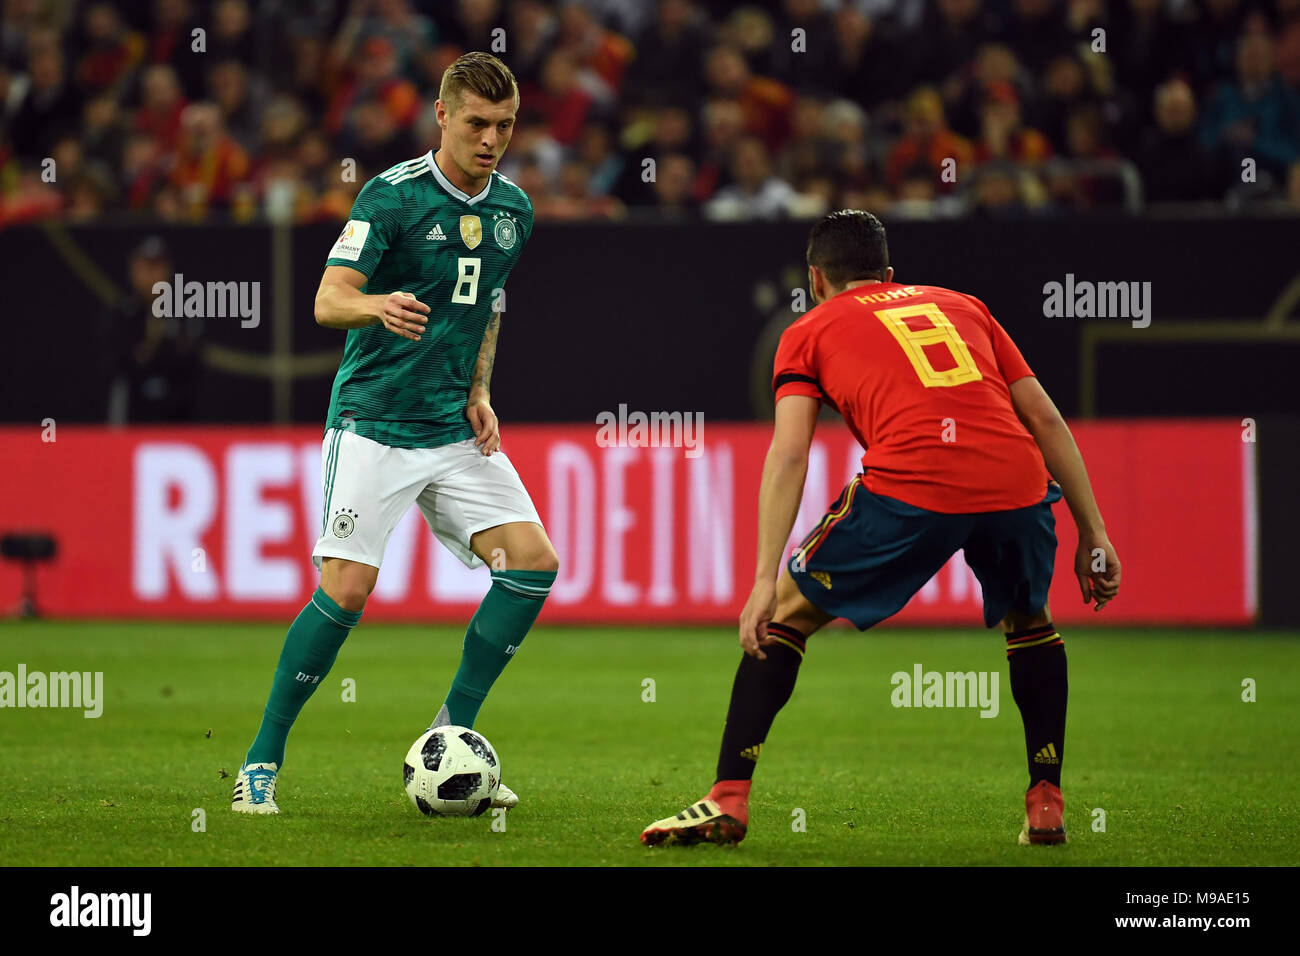 Soccer: Friendly match, Germany vs Spain, 23 March 2018 in the ESPRIT arena, Duesseldorf, Germany: Germany's Toni Kroos (L) and Spain's Koke vying for the ball. Photo: Federico Gambarini/dpa Stock Photo